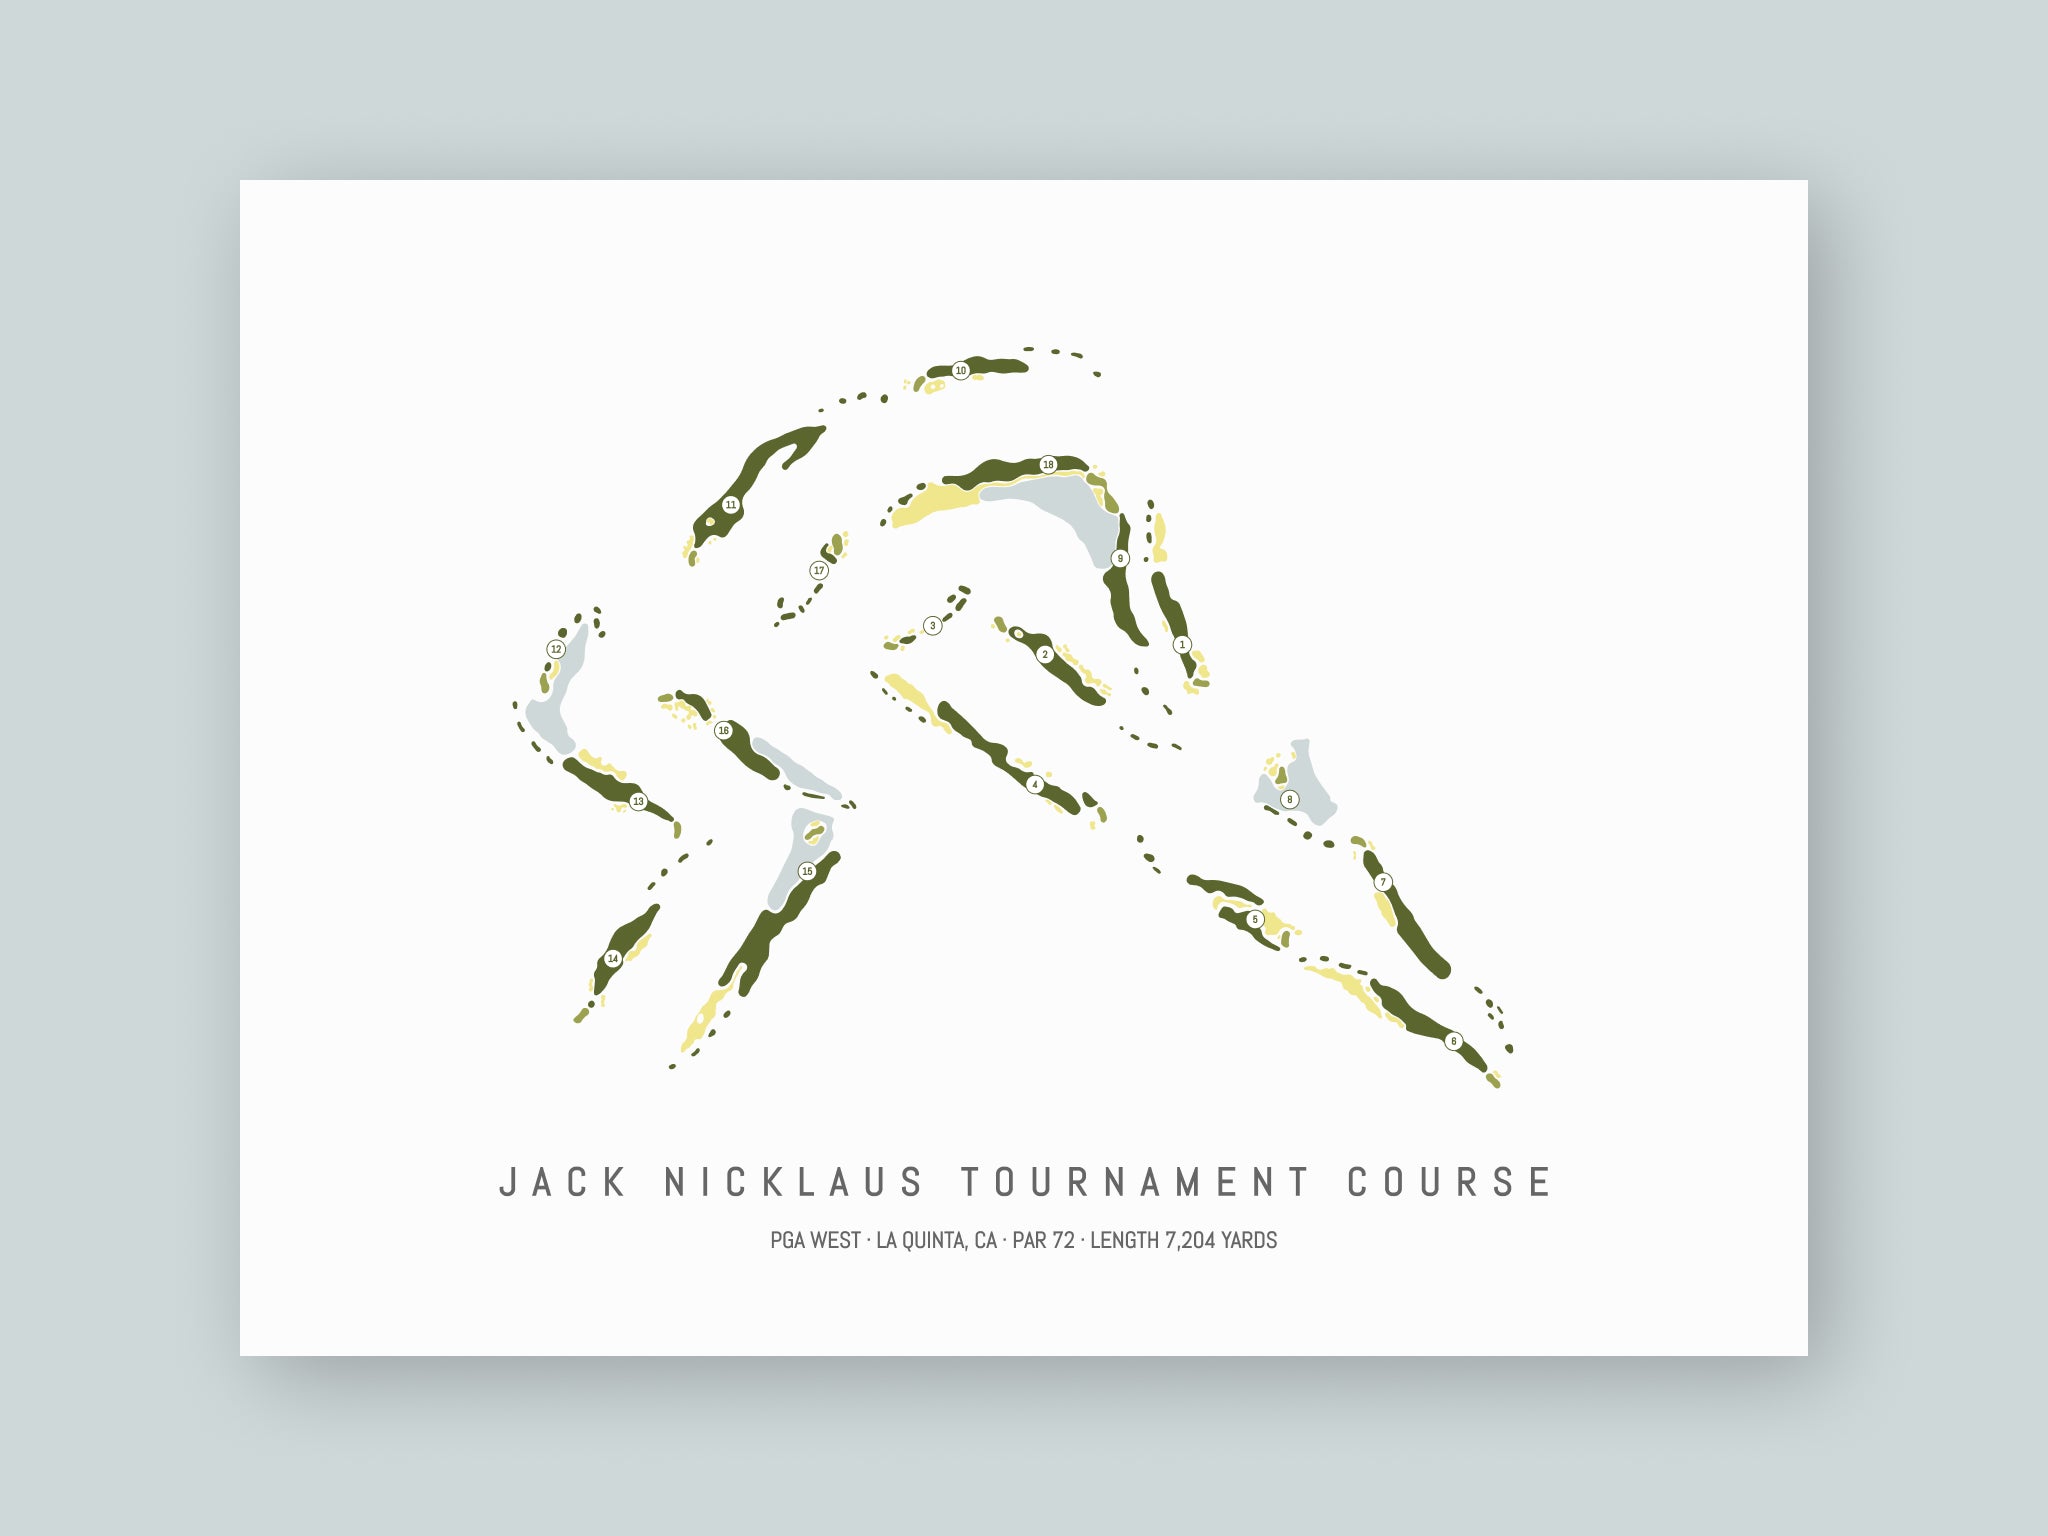 PGA-West-Jack-Nicklaus-Tournament-Course-CA--Unframed-24x18-With-Hole-Numbers